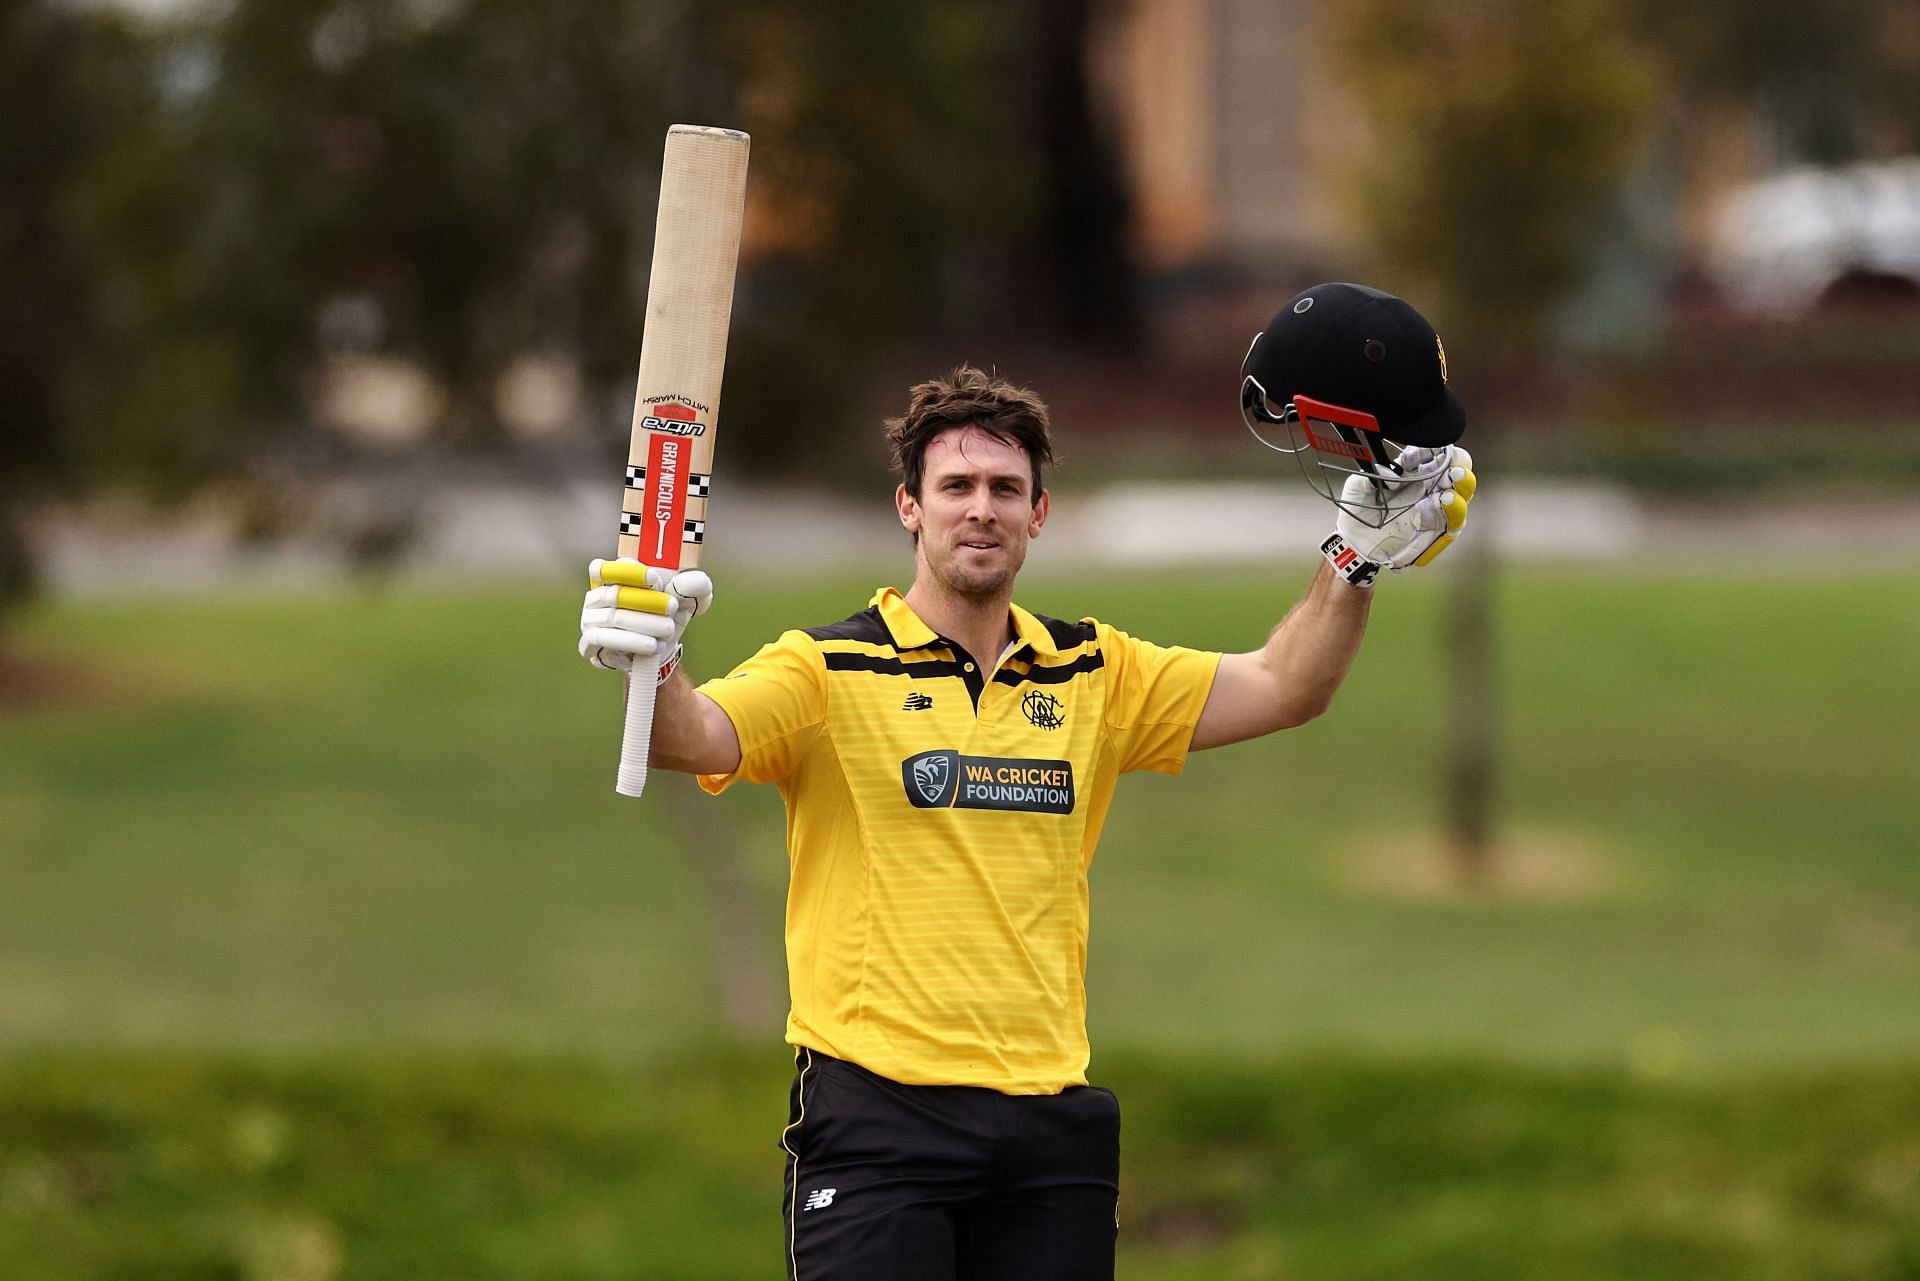 Mitchell Marsh in action at the Marsh One-Day Cup - SA v WA